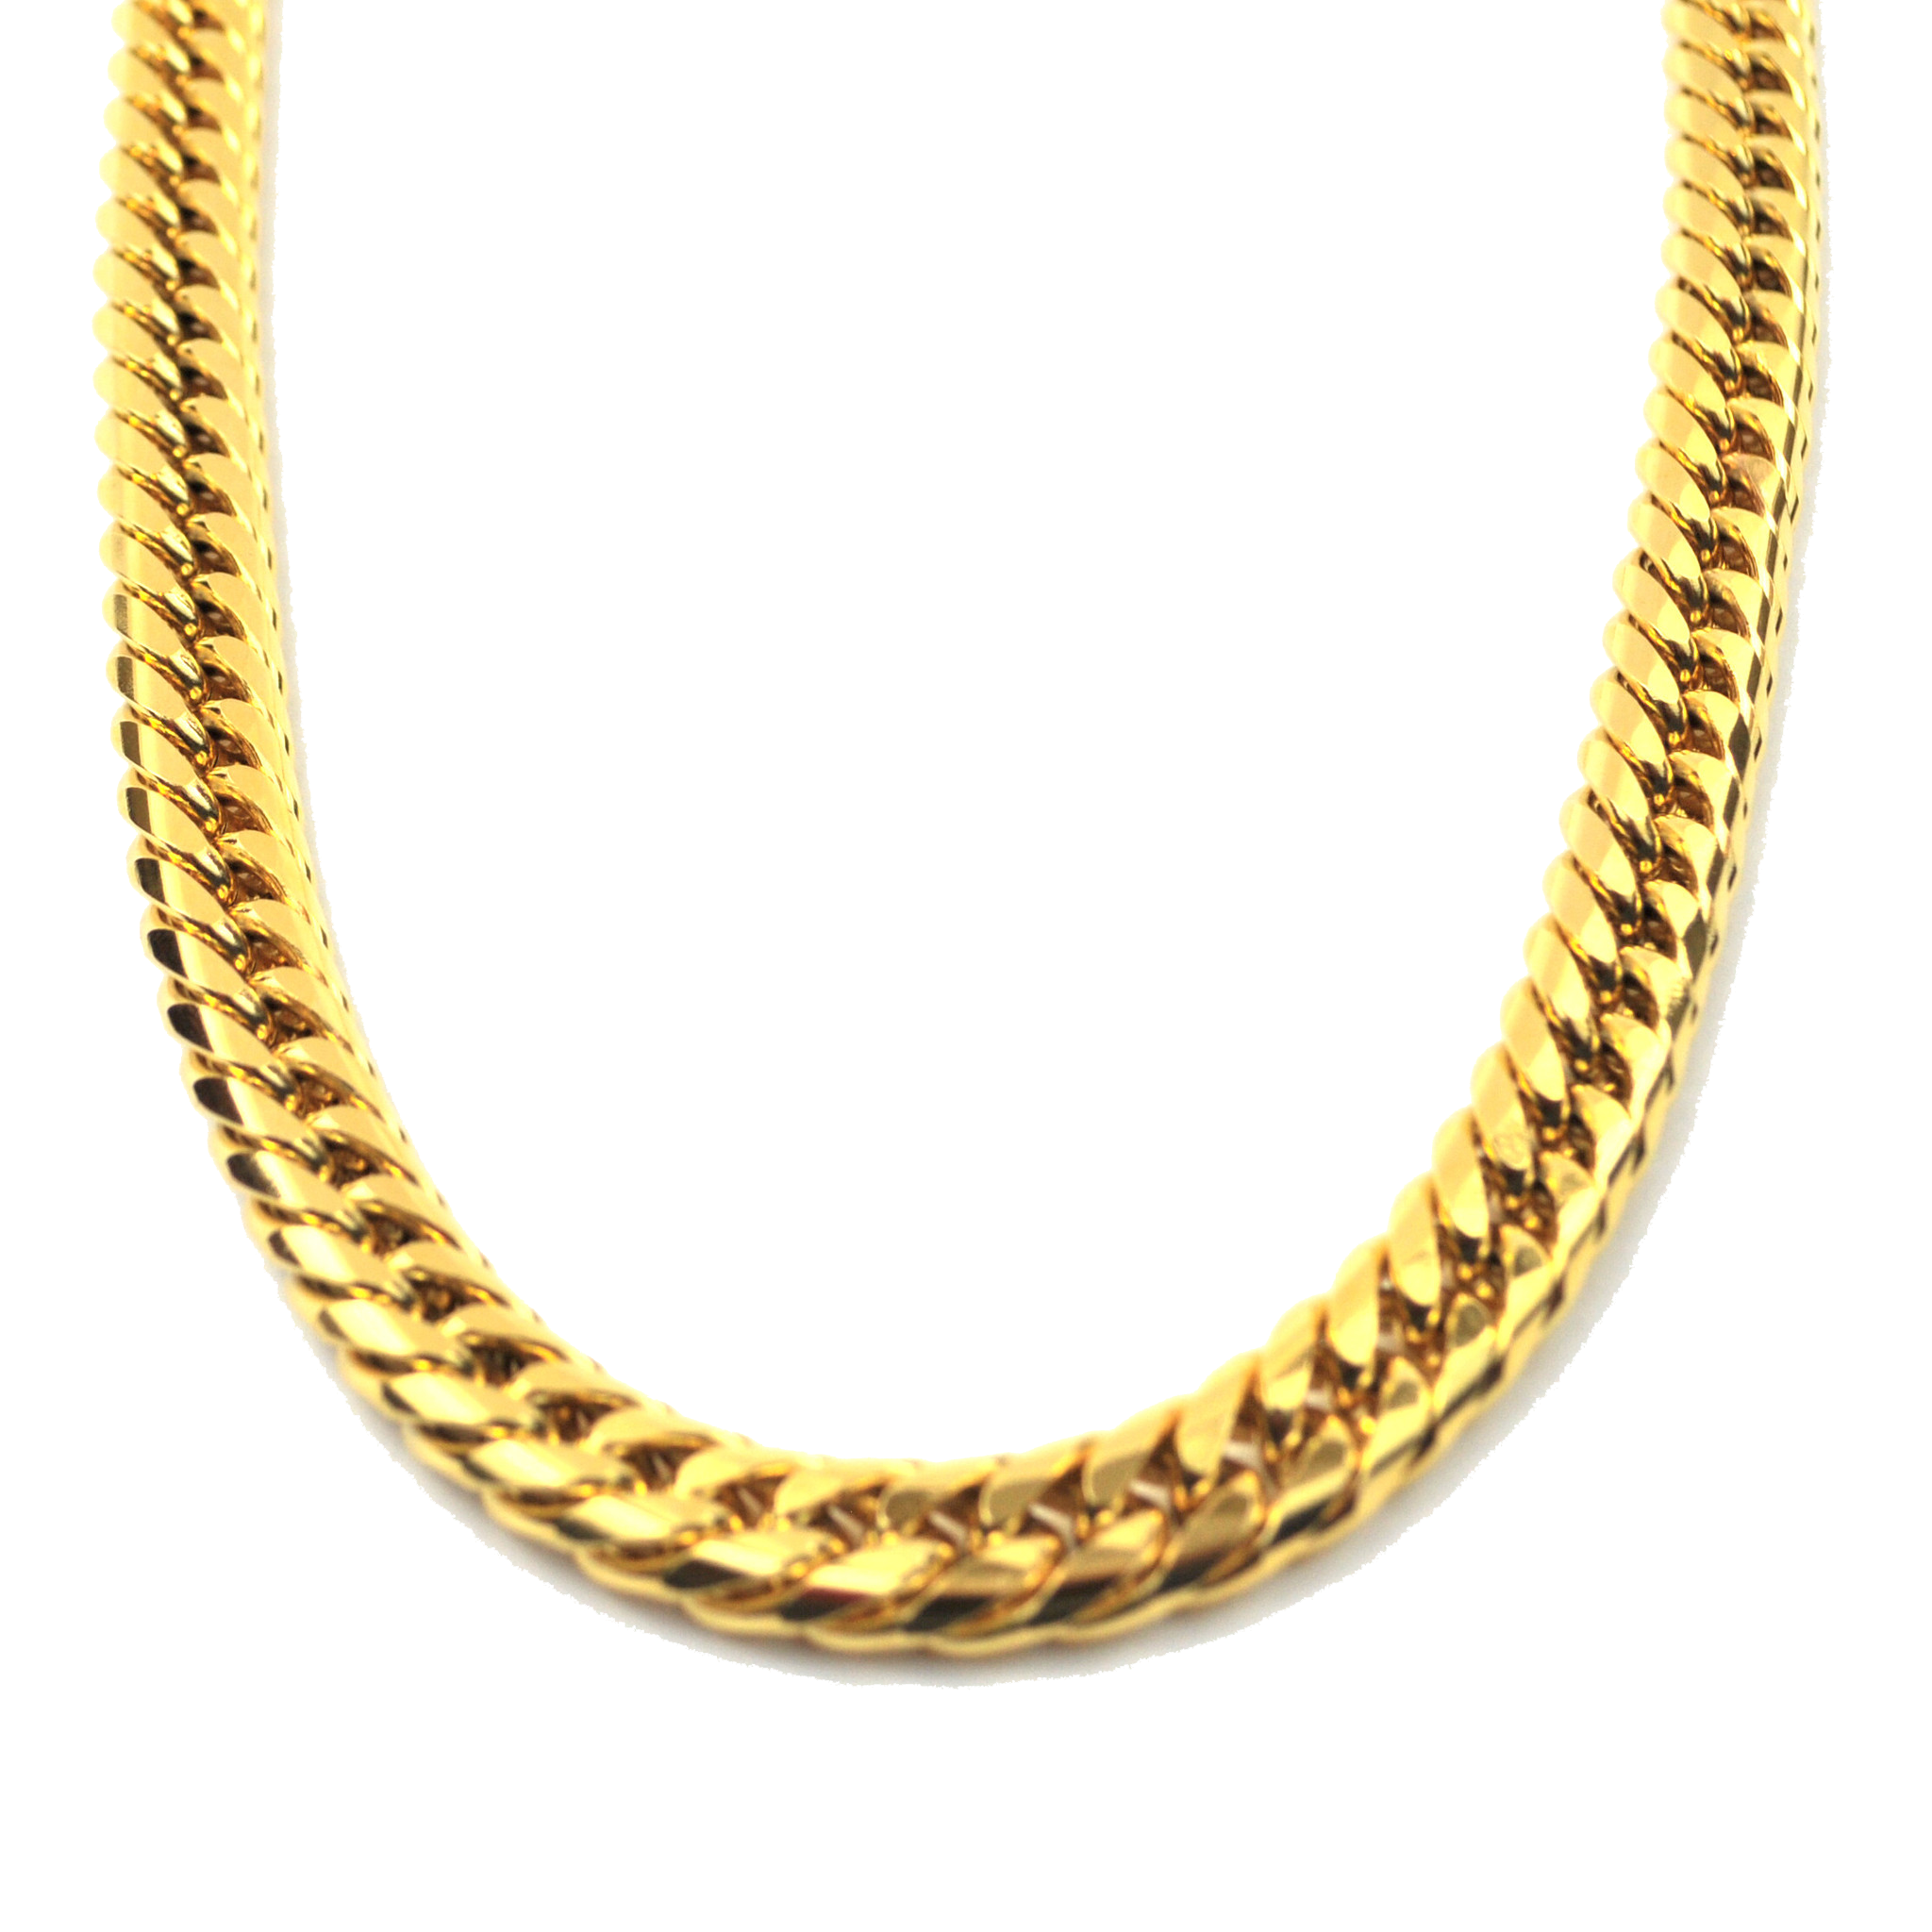 0 Result Images of Animated Gold Chain Png - PNG Image Collection